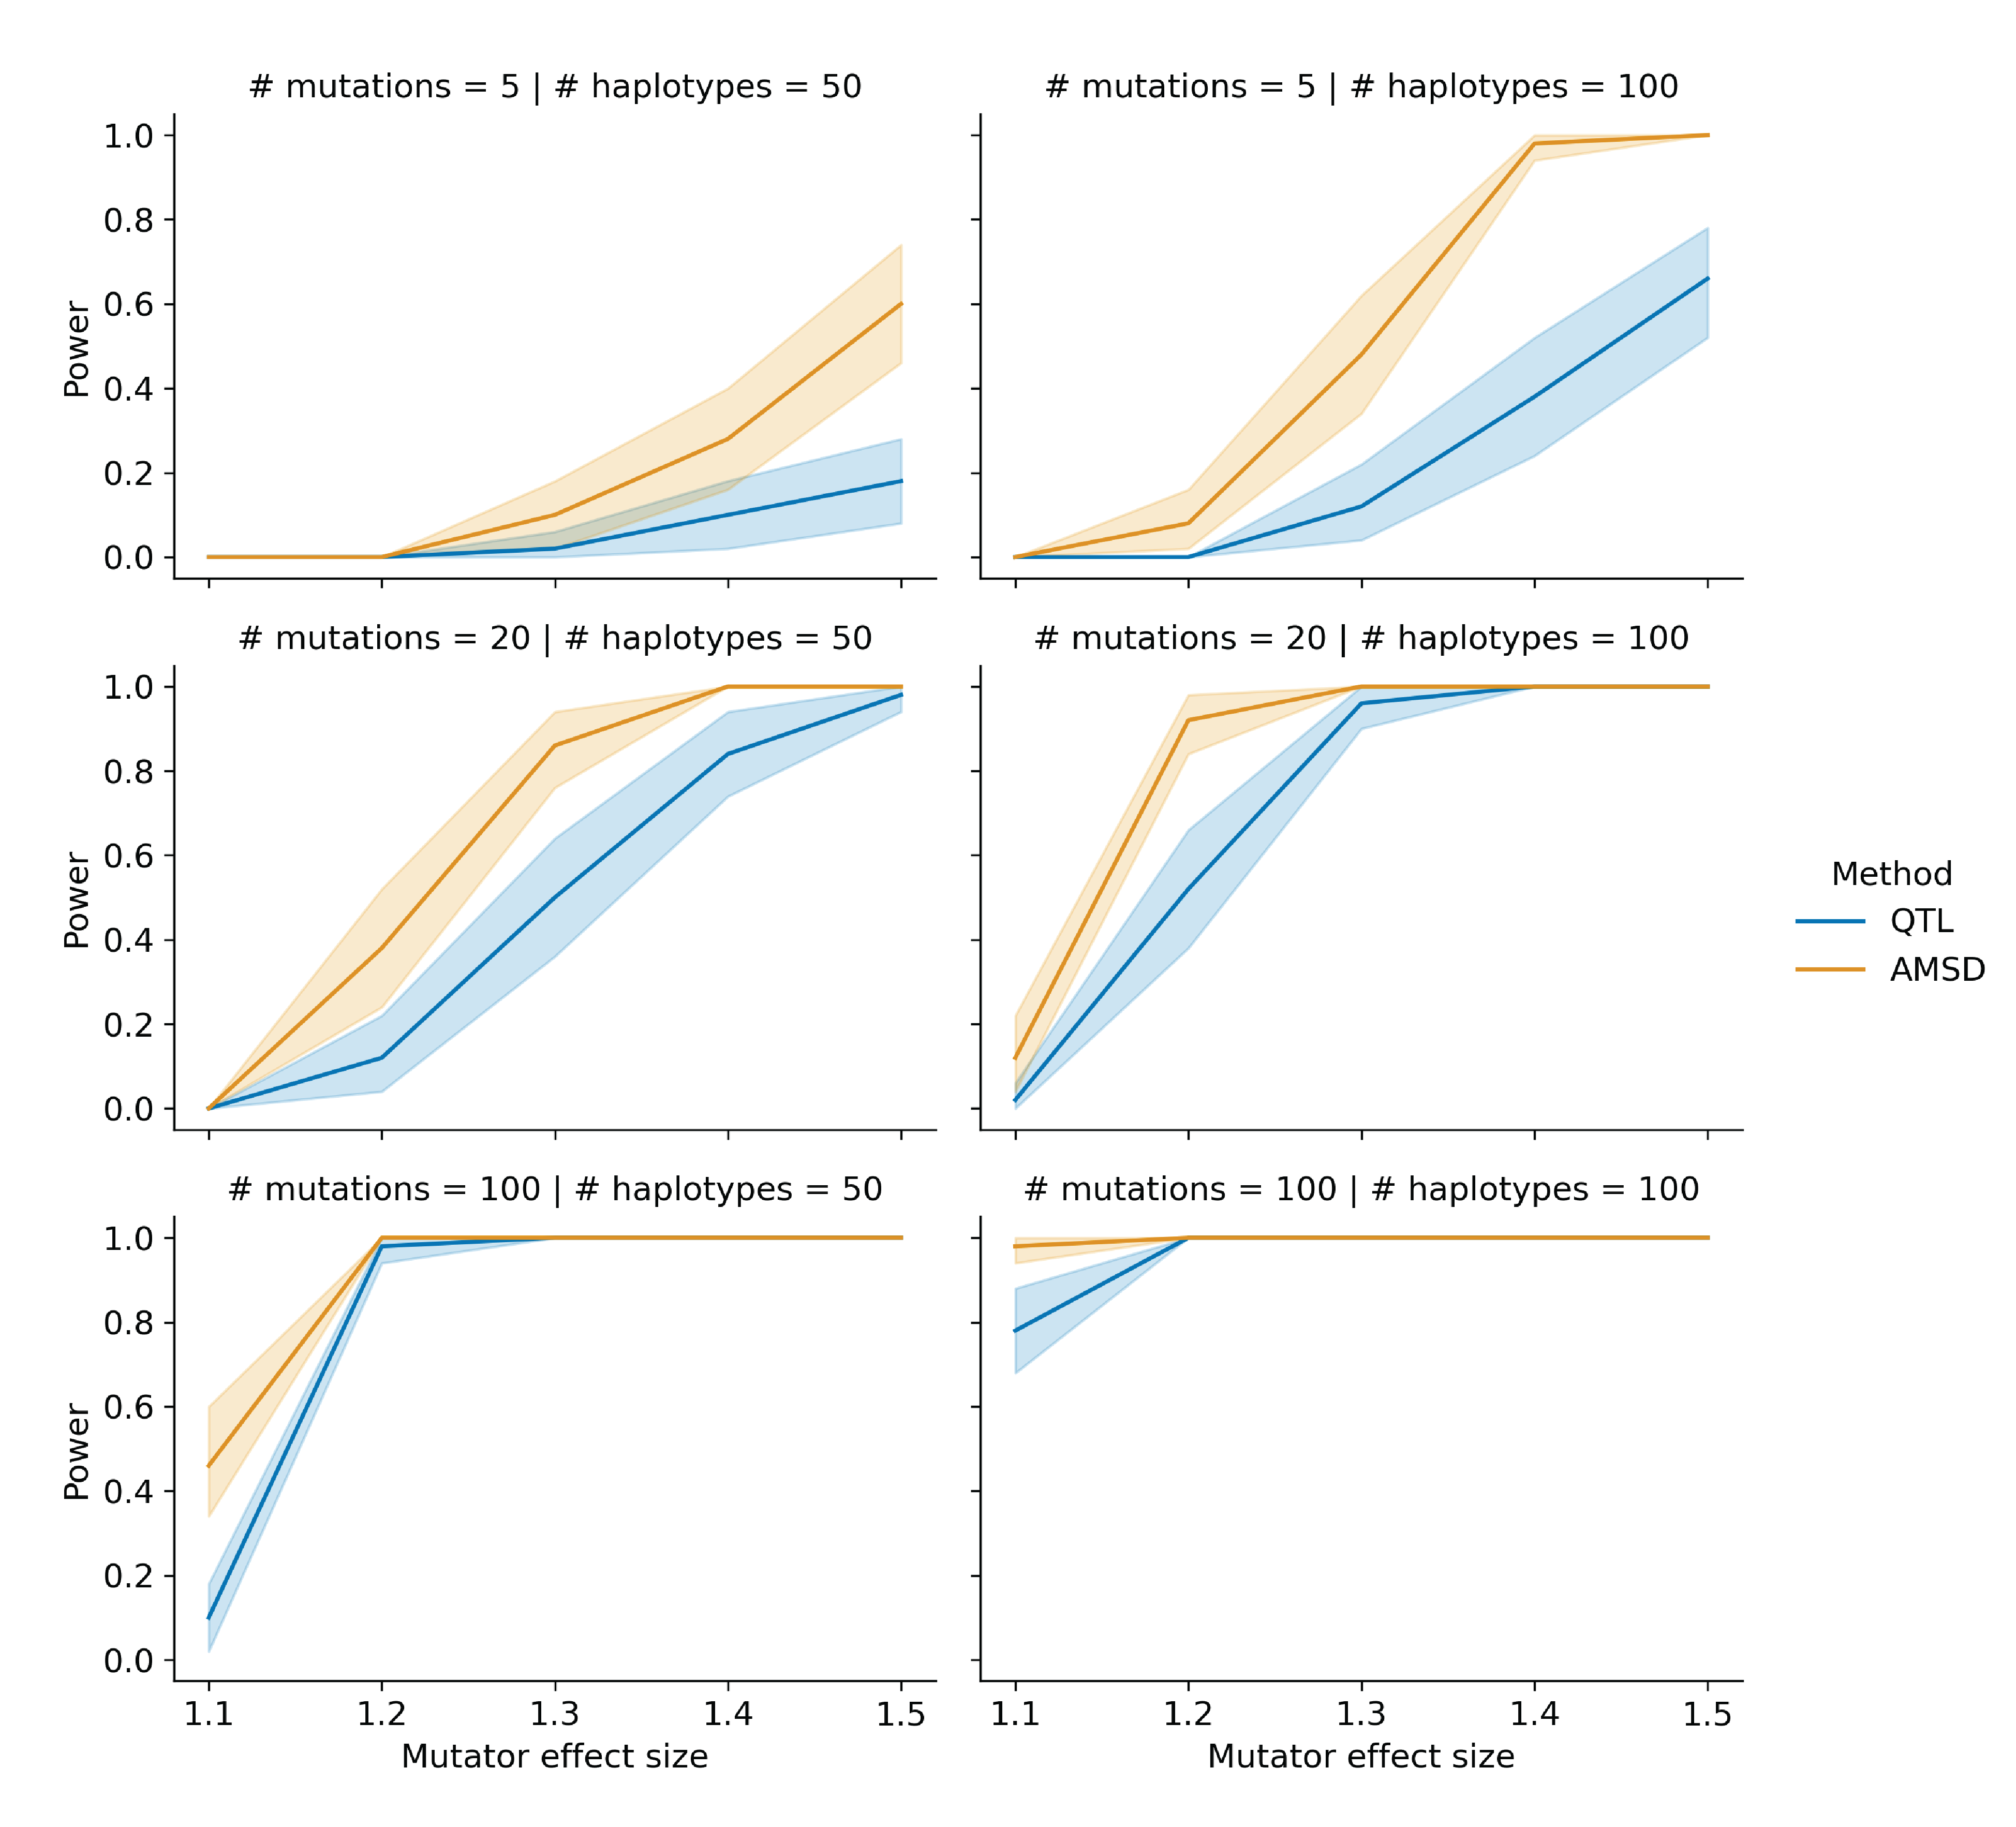 Figure 1-figure supplement 3: Comparing power between the aggregate mutation spectrum distance method and QTL mapping with variable counts of simulated mutations. In each of 50 trials, we simulated genotypes at 1,000 biallelic loci on a toy population of 50 or 100 haplotypes as follows. At every locus on every haplotype, we drew a single floating point value from a uniform distribution [0, 1). If that value was less than or equal to 0.5, we set the allele to be “A”; otherwise, we set the allele to be “B”. In each trial, we also simulated de novo germline mutations on the population of haplotypes, such that at a single locus g_i, we augmented the rate of the specified mutation type by the specified effect size (an effect size of 1.5 indicates a 50% increase in the mutation rate) on haplotypes carrying “A” alleles. To more closely approximate the BXD RILs, the mean number of simulated mutations on each haplotype was allowed to vary by a factor of 20 (see Materials and Methods for more details). We then applied the aggregate mutation spectrum distance method to these simulated data and asked if the adjusted cosine distance at locus g_i was greater than expected by chance. Similarly, in each trial, we used R/qtl2 to perform a genome scan for QTL and asked if the log-odds score at g_i was greater than expected by chance. Given a specific combination of parameters, the y-axis denotes the fraction of 50 trials in which the simulated mutator allele could be detected at a significance threshold of p = 0.05 (for AMSD) or at an alpha of \frac{0.05}{7} (for QTL mapping). Shaded areas indicate the 95% bootstrap confidence interval surrounding that estimate.